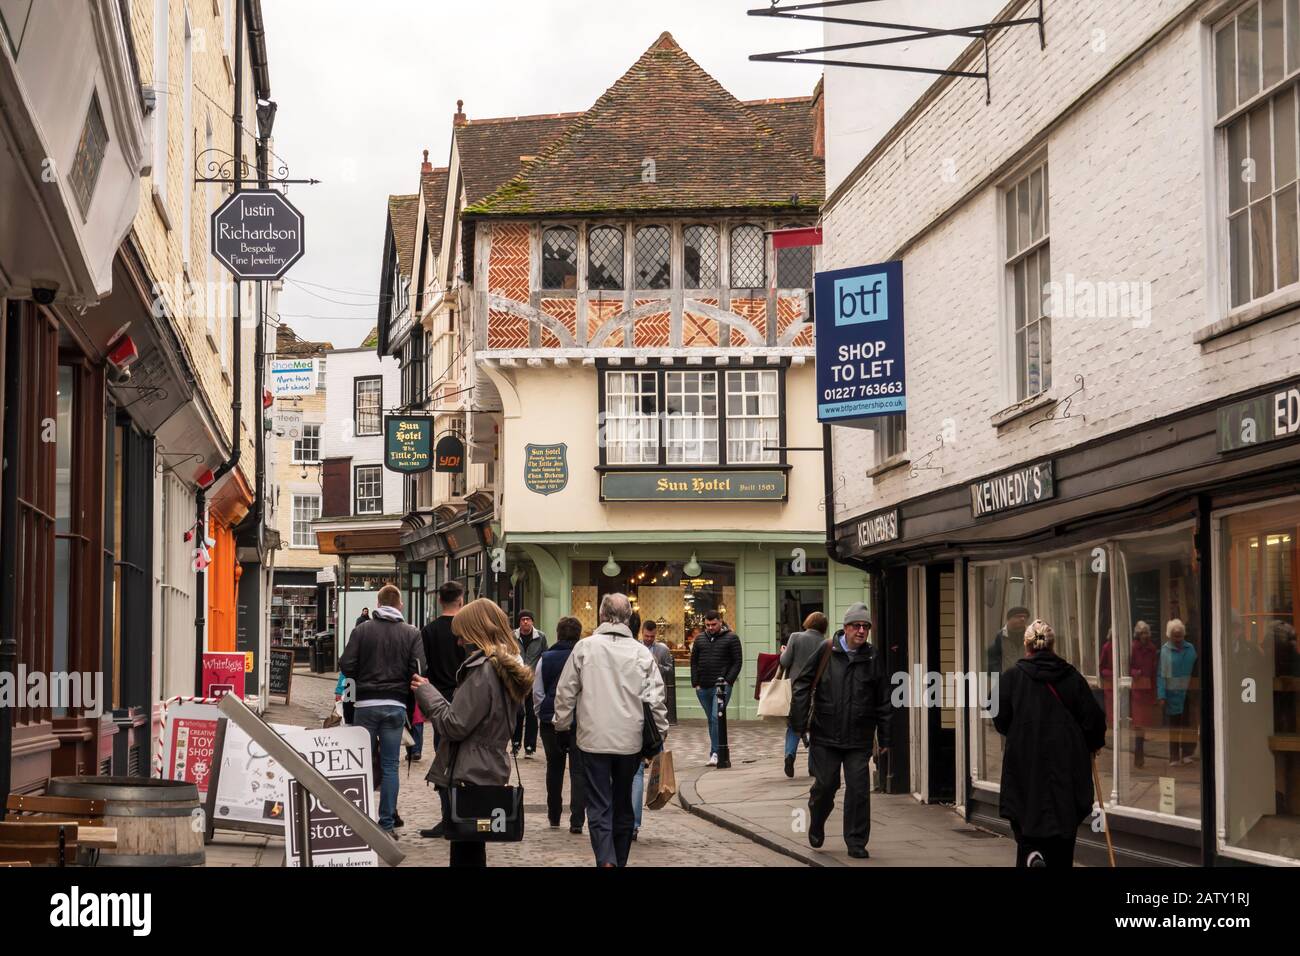 Sun Hotel,Boutiques,Shoppers,Sun Street,Canterbury,Kent,Angleterre Banque D'Images